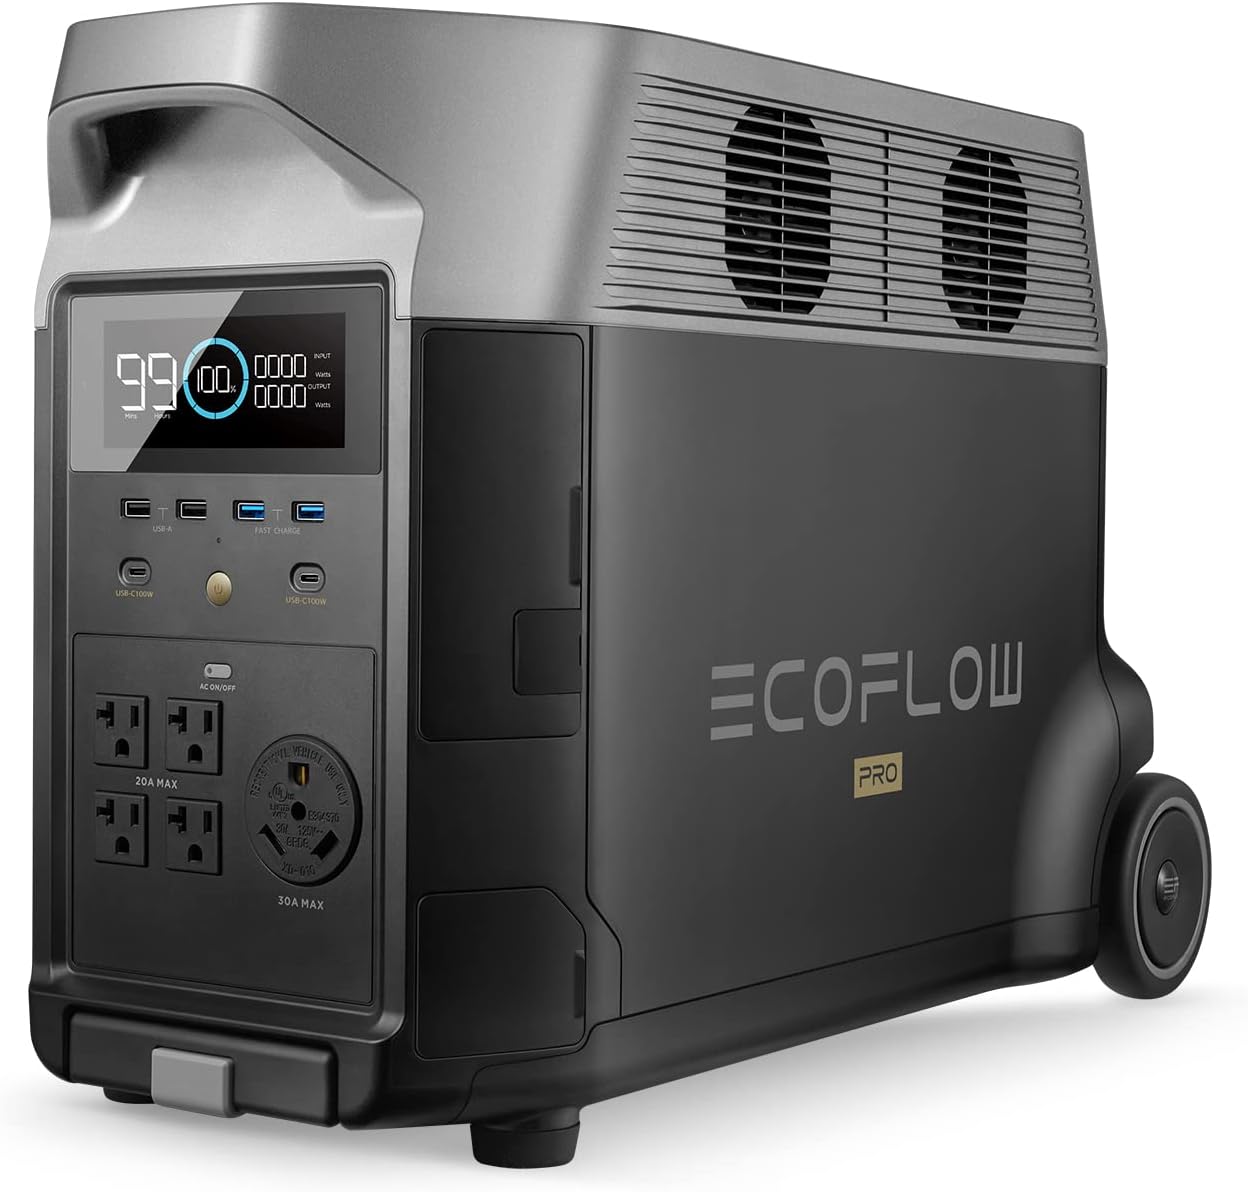 EcoFlow DELTA Pro Portable Power Station - 3600Wh with 5 AC